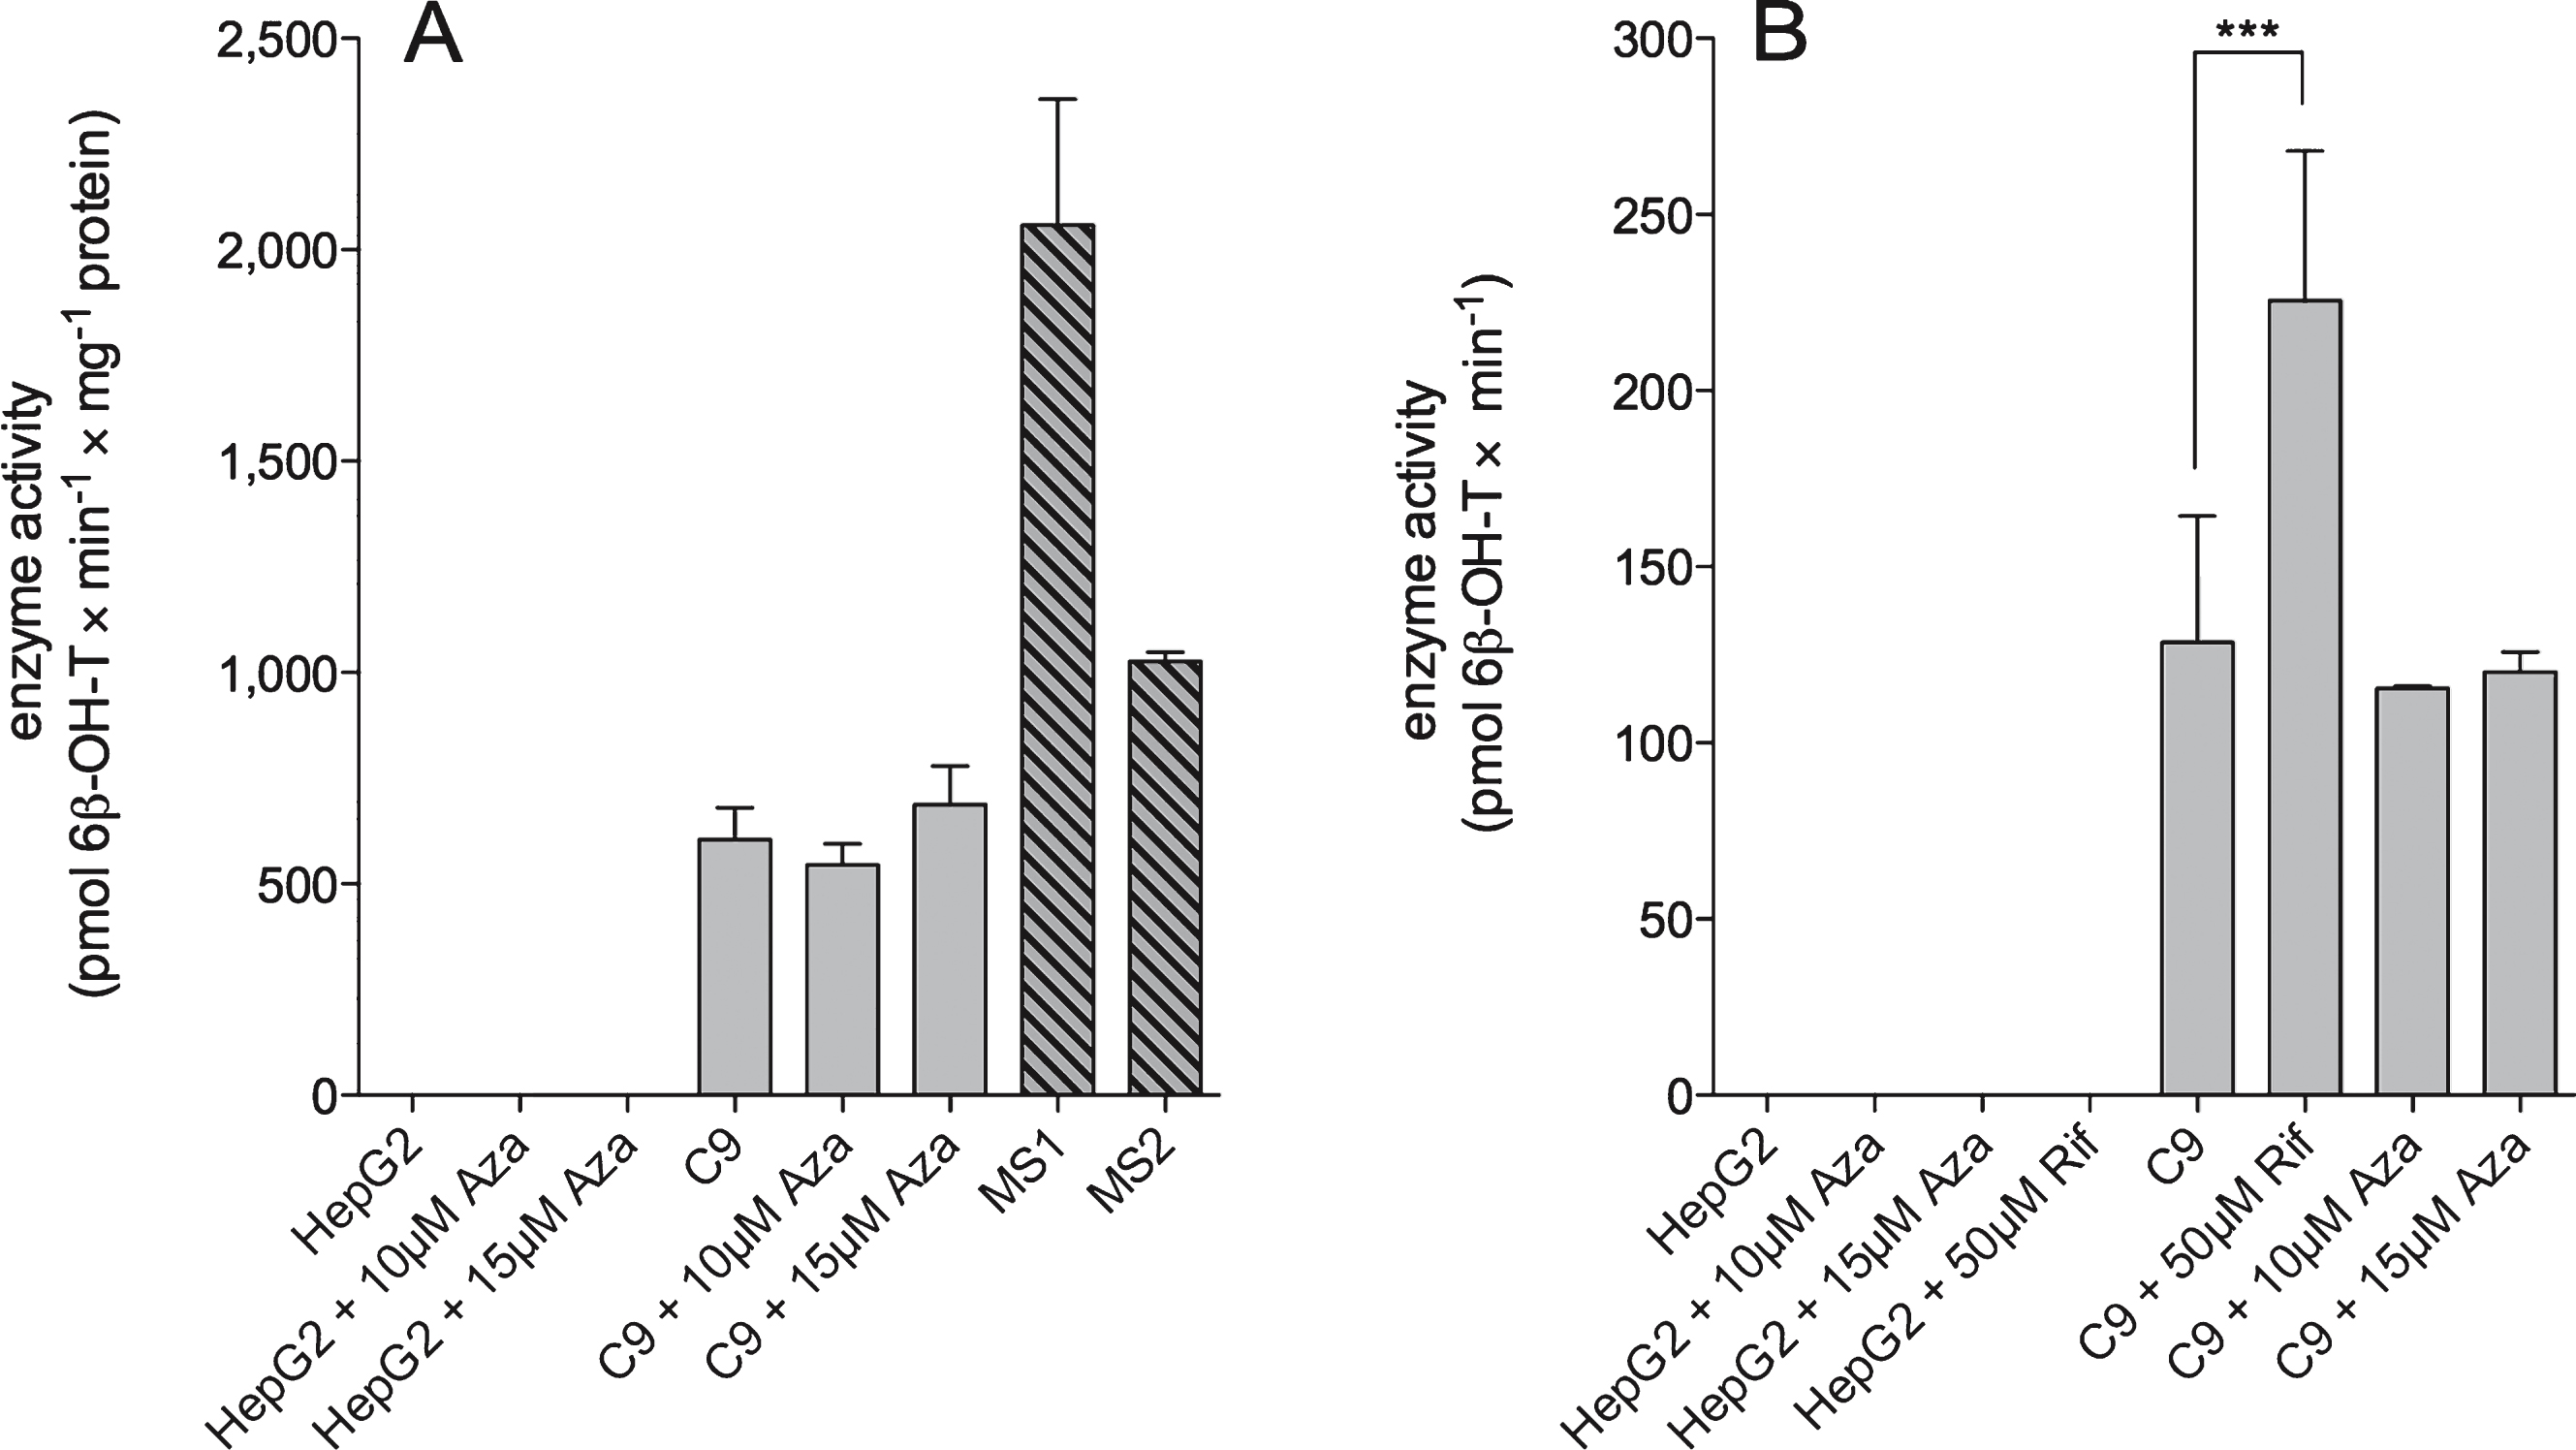 CYP3A4 testosterone hydroxylation activity in HepG2 clone 9 is unaffected by 5-azacytidine, but can be raised by rifampicin. 0.5 × 106 HepG2 or clone 9 (C9) cells were seeded into 24-well plates and cultivated for three days in the presence or absence of 5-azacytidine (Aza) or rifampicin (Rif) as indicated. Medium was changed by Krebs Henseleit buffer containing 250 μM testosterone and incubated for two hours to produce the main metabolite 6β-hydroxytestosterone (6β-OH-T). In parallel, CYP3A4 testosterone hydroxylase activity was assayed with microsomal preparations that were used directly (MS1) or subjected to one additional cycle of freeze-thawing (MS2). Substrate and metabolite analyses were performed as described in Materials and Methods. (A) CYP3A4 enzyme activity normalized to total cellular or microsomal protein content by BCA assay; (B) CYP3A4 enzyme activity per well. Mean values and standard deviations from independent experiments, each with triplicates, were calculated. Student's t-test compares C9 cells with and without 50 μM rifampicin treatment as indicated;  ***, p <  0.001.